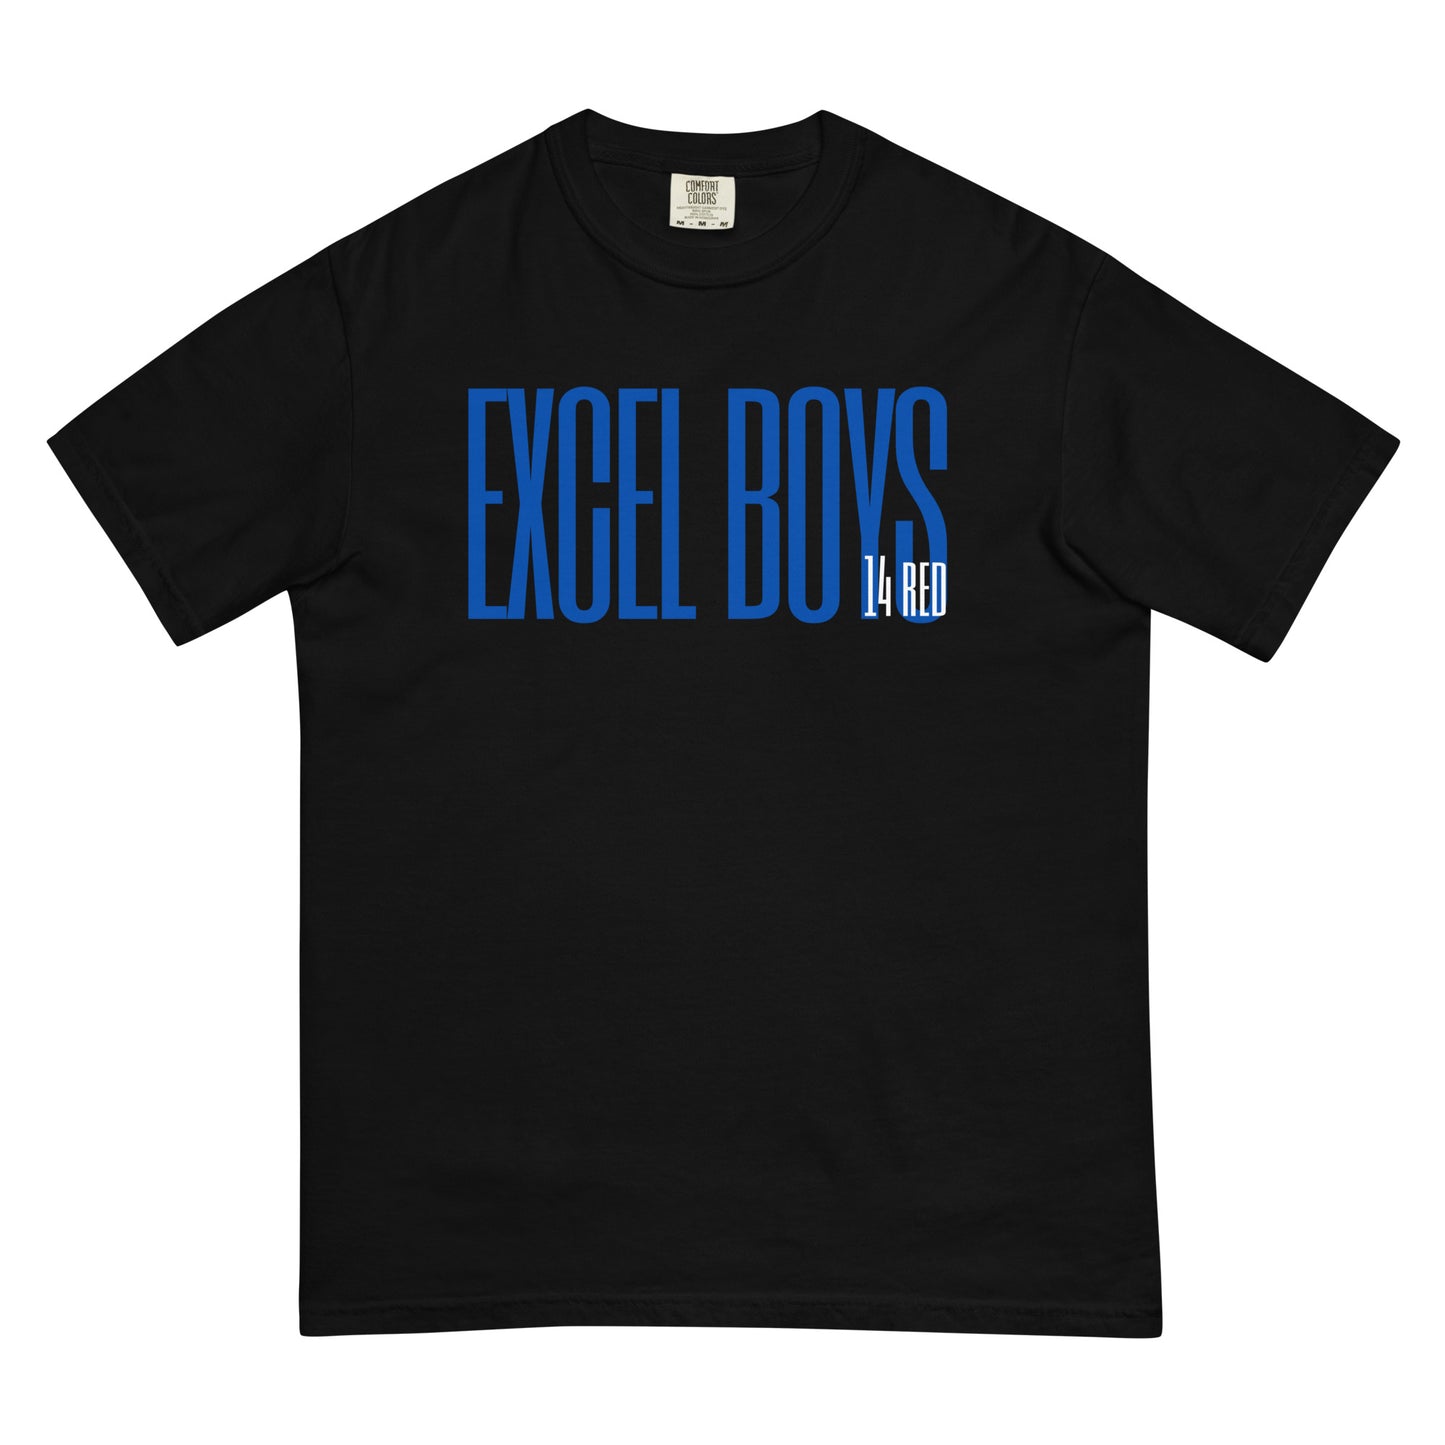 Excel Boys Volleyball - 14 Red - Unisex garment-dyed heavyweight t-shirt